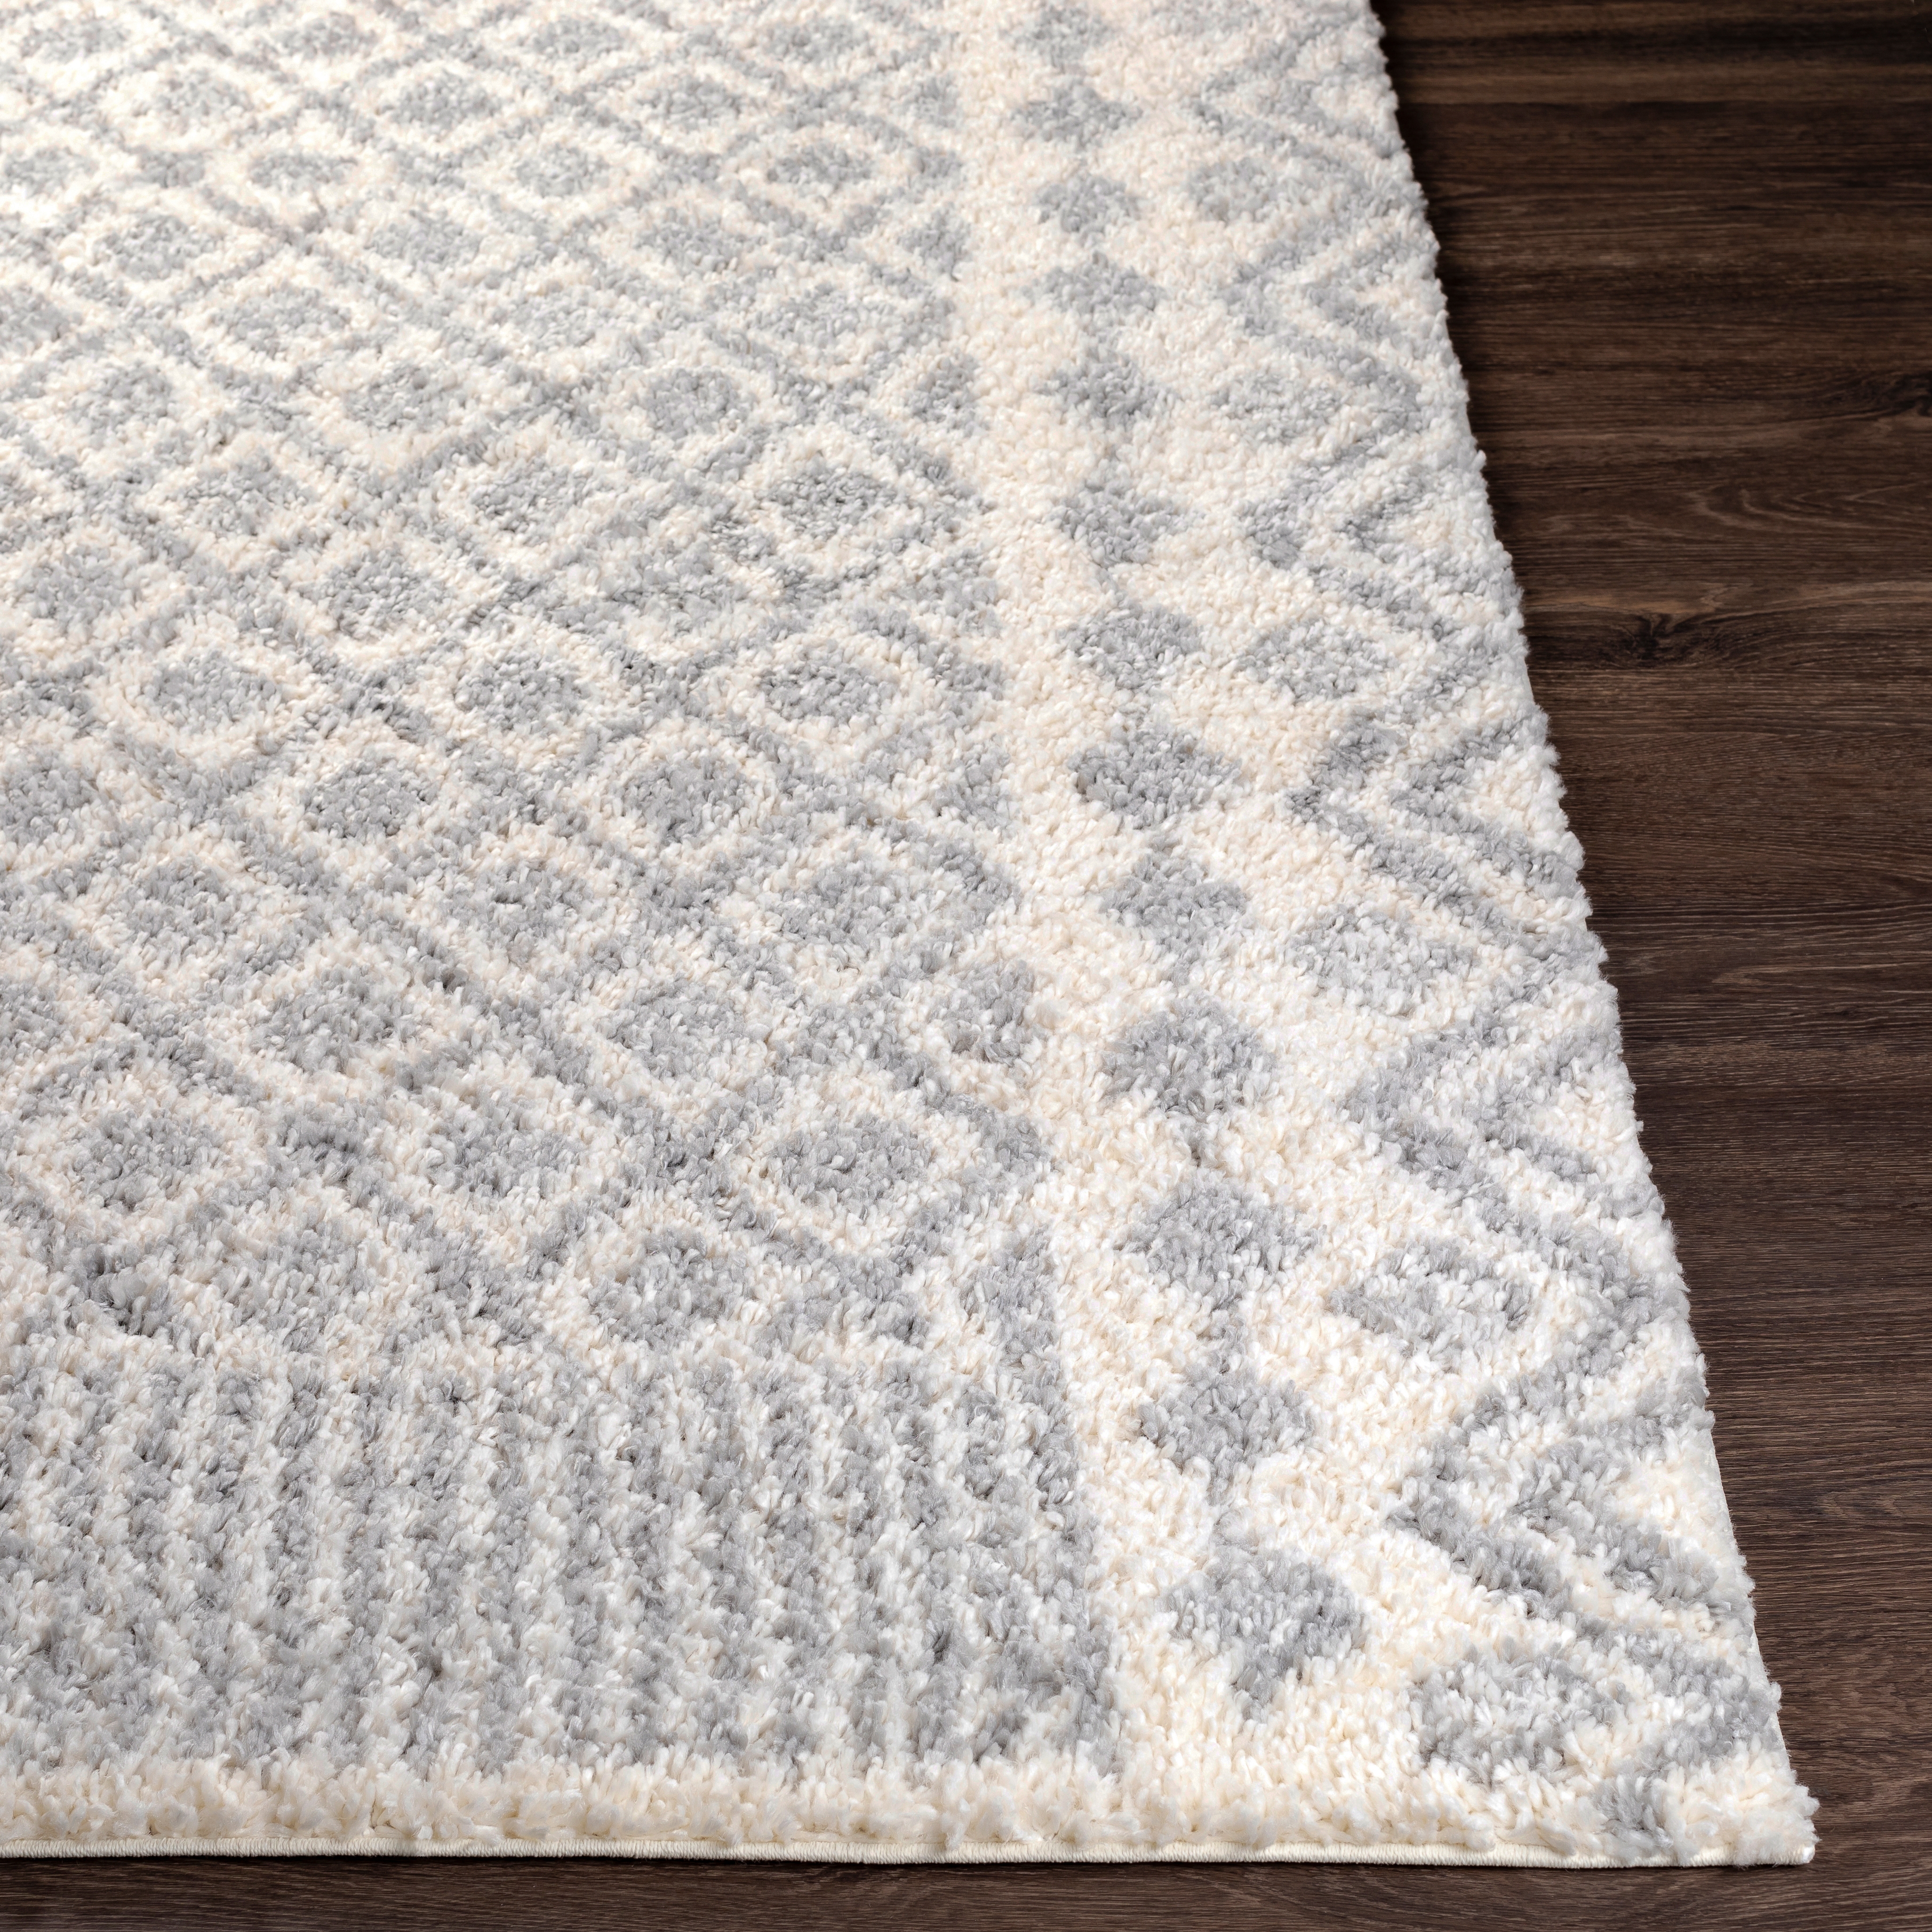 Deluxe Shag Rug, 7'10" x 10'3" - Image 2